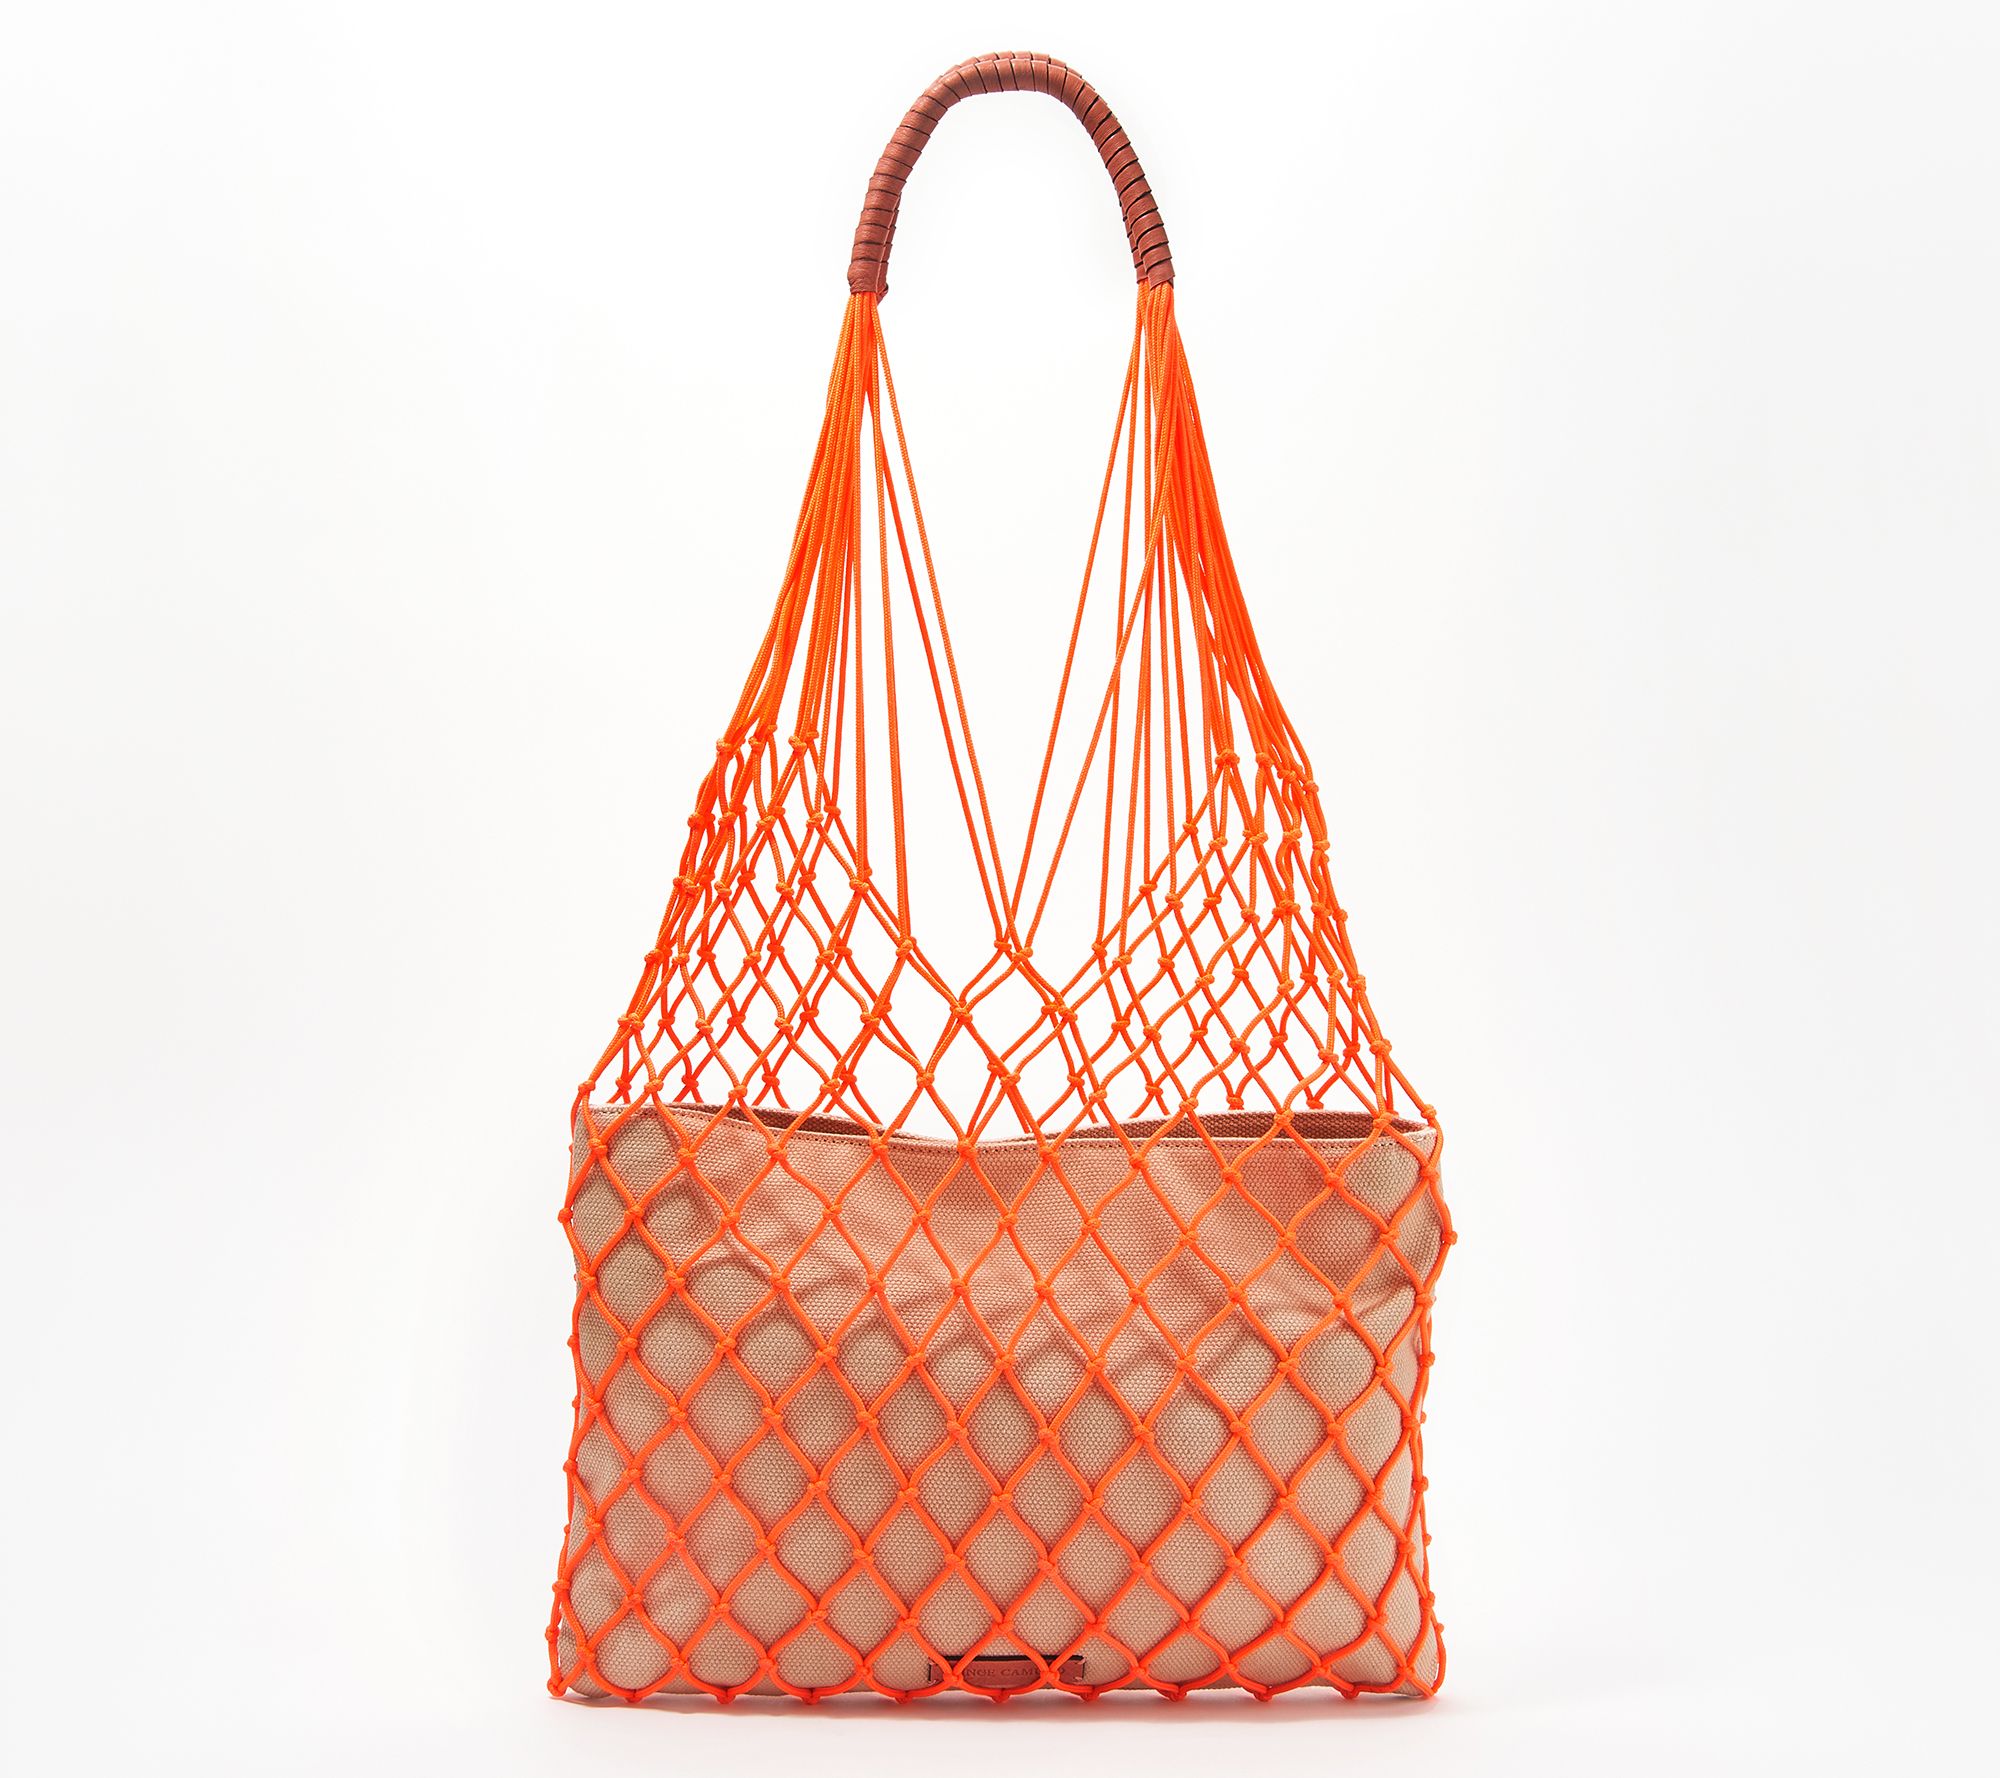 Vince Camuto Rope and Canvas Tote Bag - Zest - QVC.com